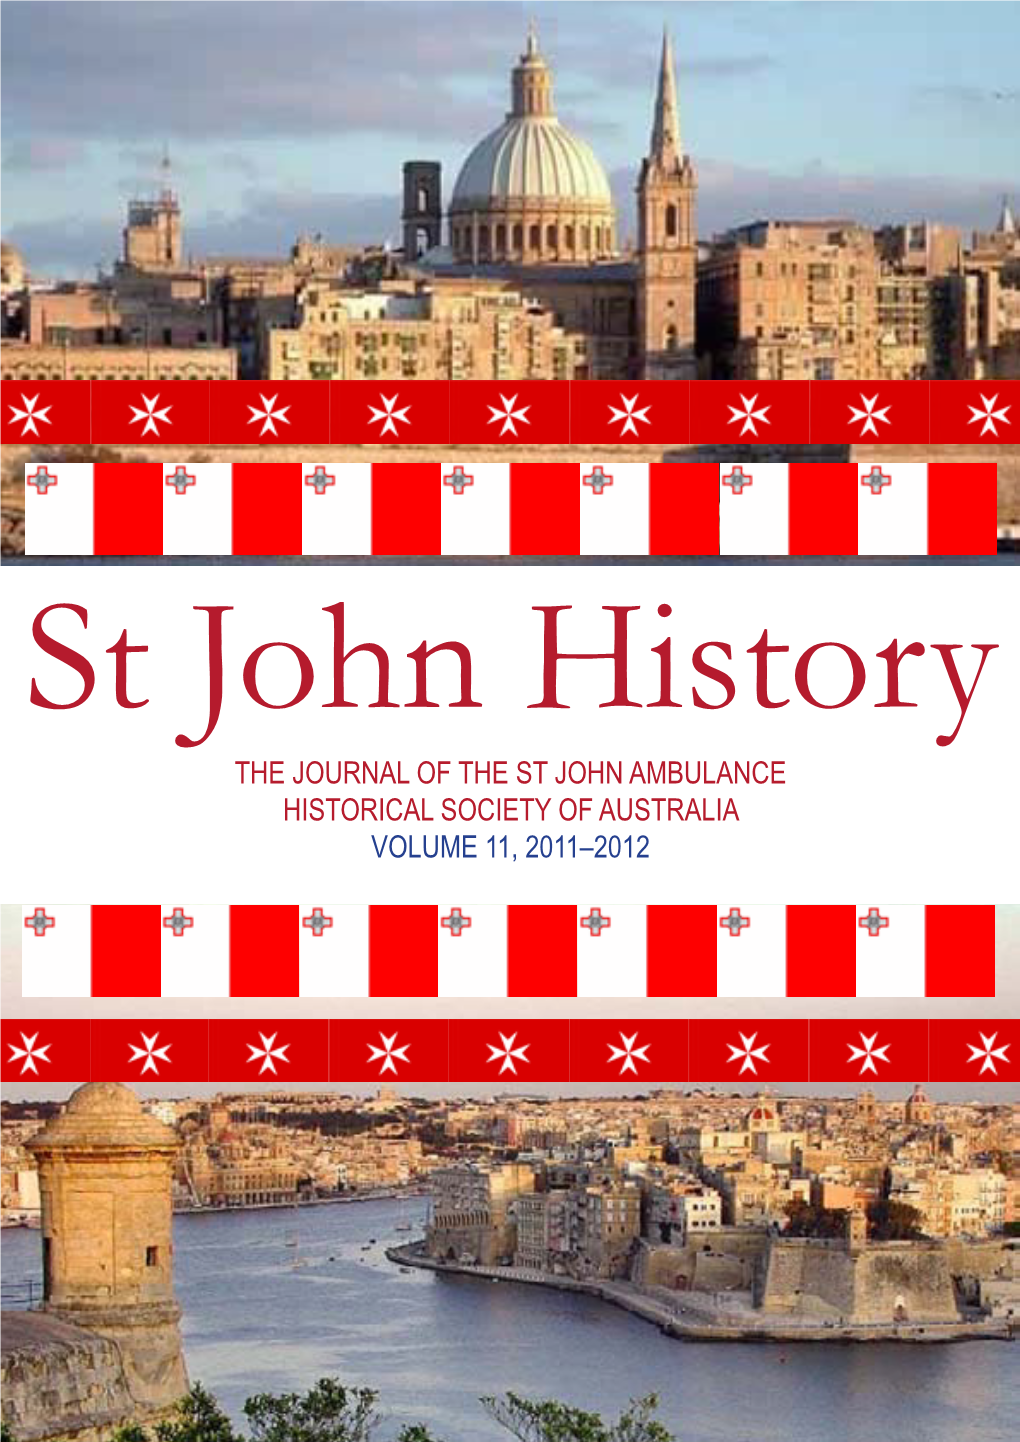 THE JOURNAL of the ST JOHN AMBULANCE HISTORICAL SOCIETY of AUSTRALIA VOLUME 11, 2011–2012 ‘Preserving and Promoting the St John Heritage’